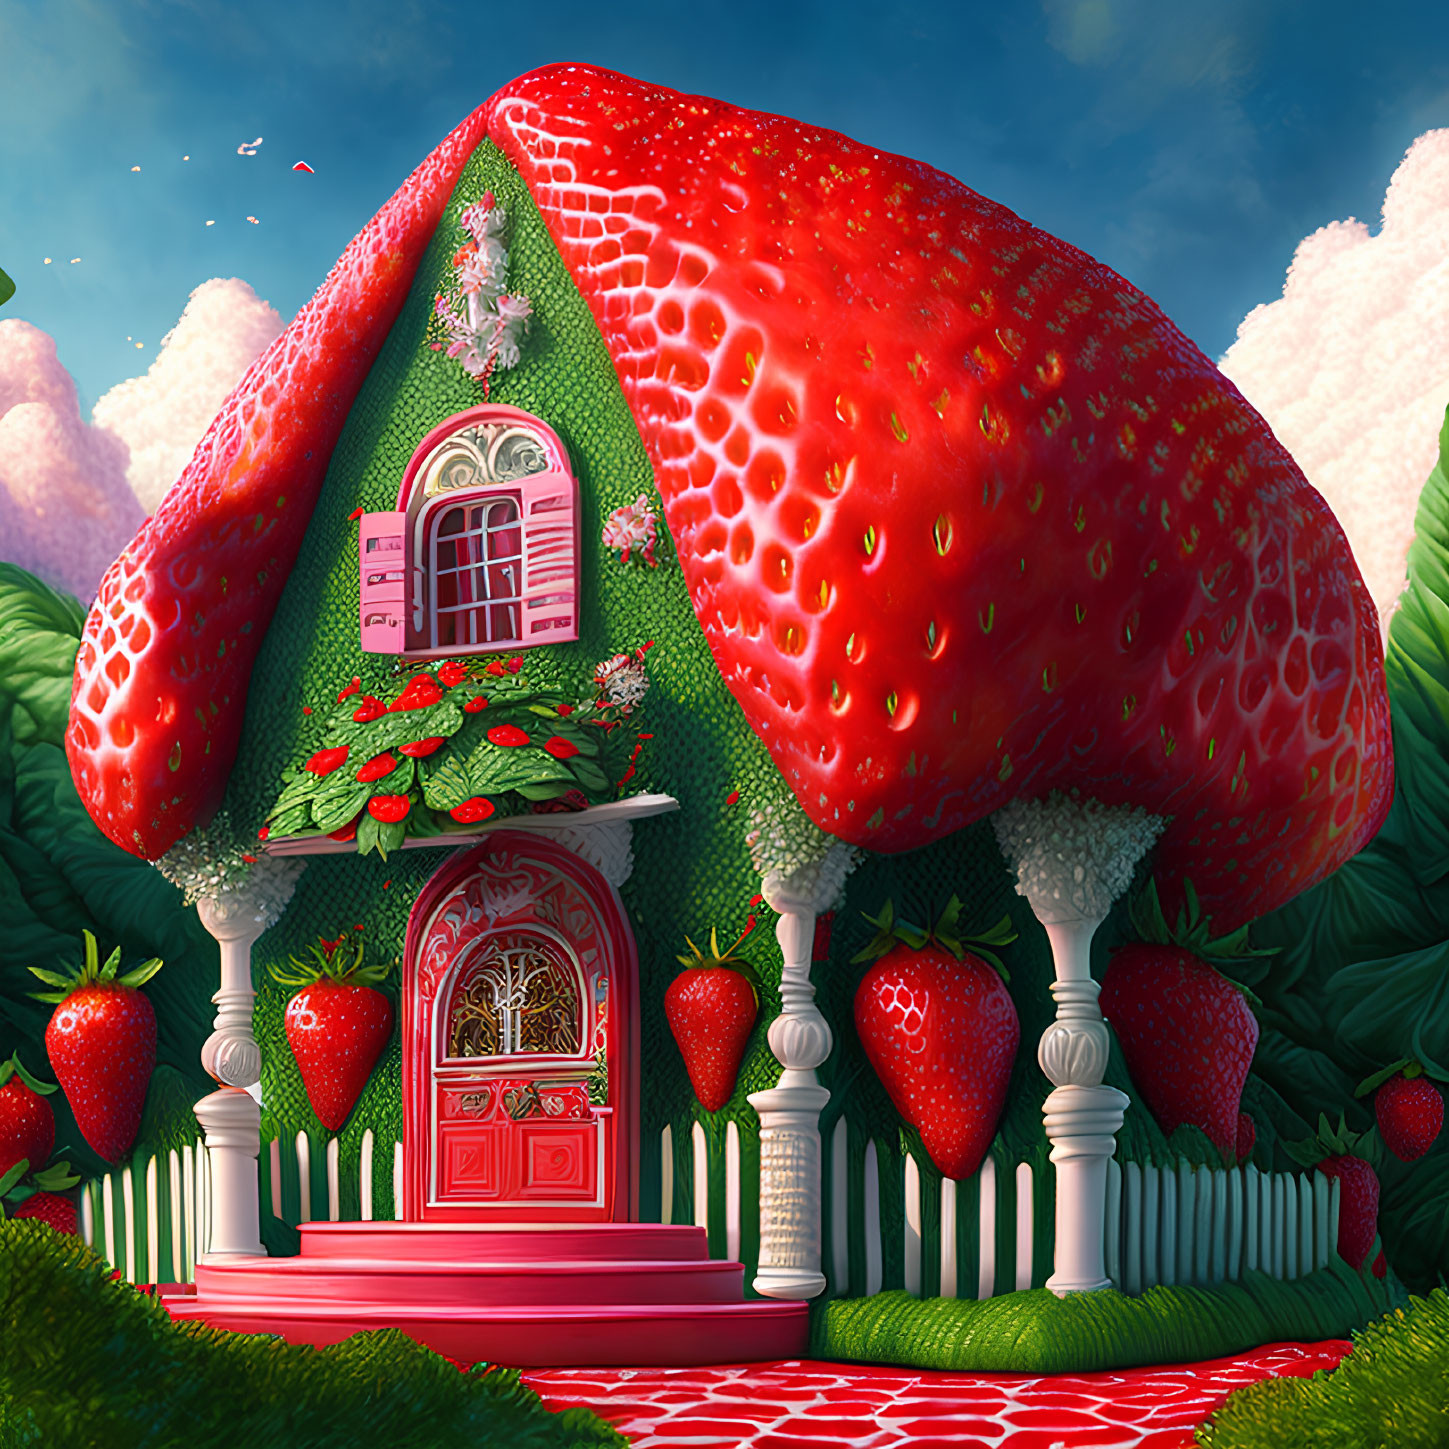 Whimsical strawberry-themed house with berry decorations